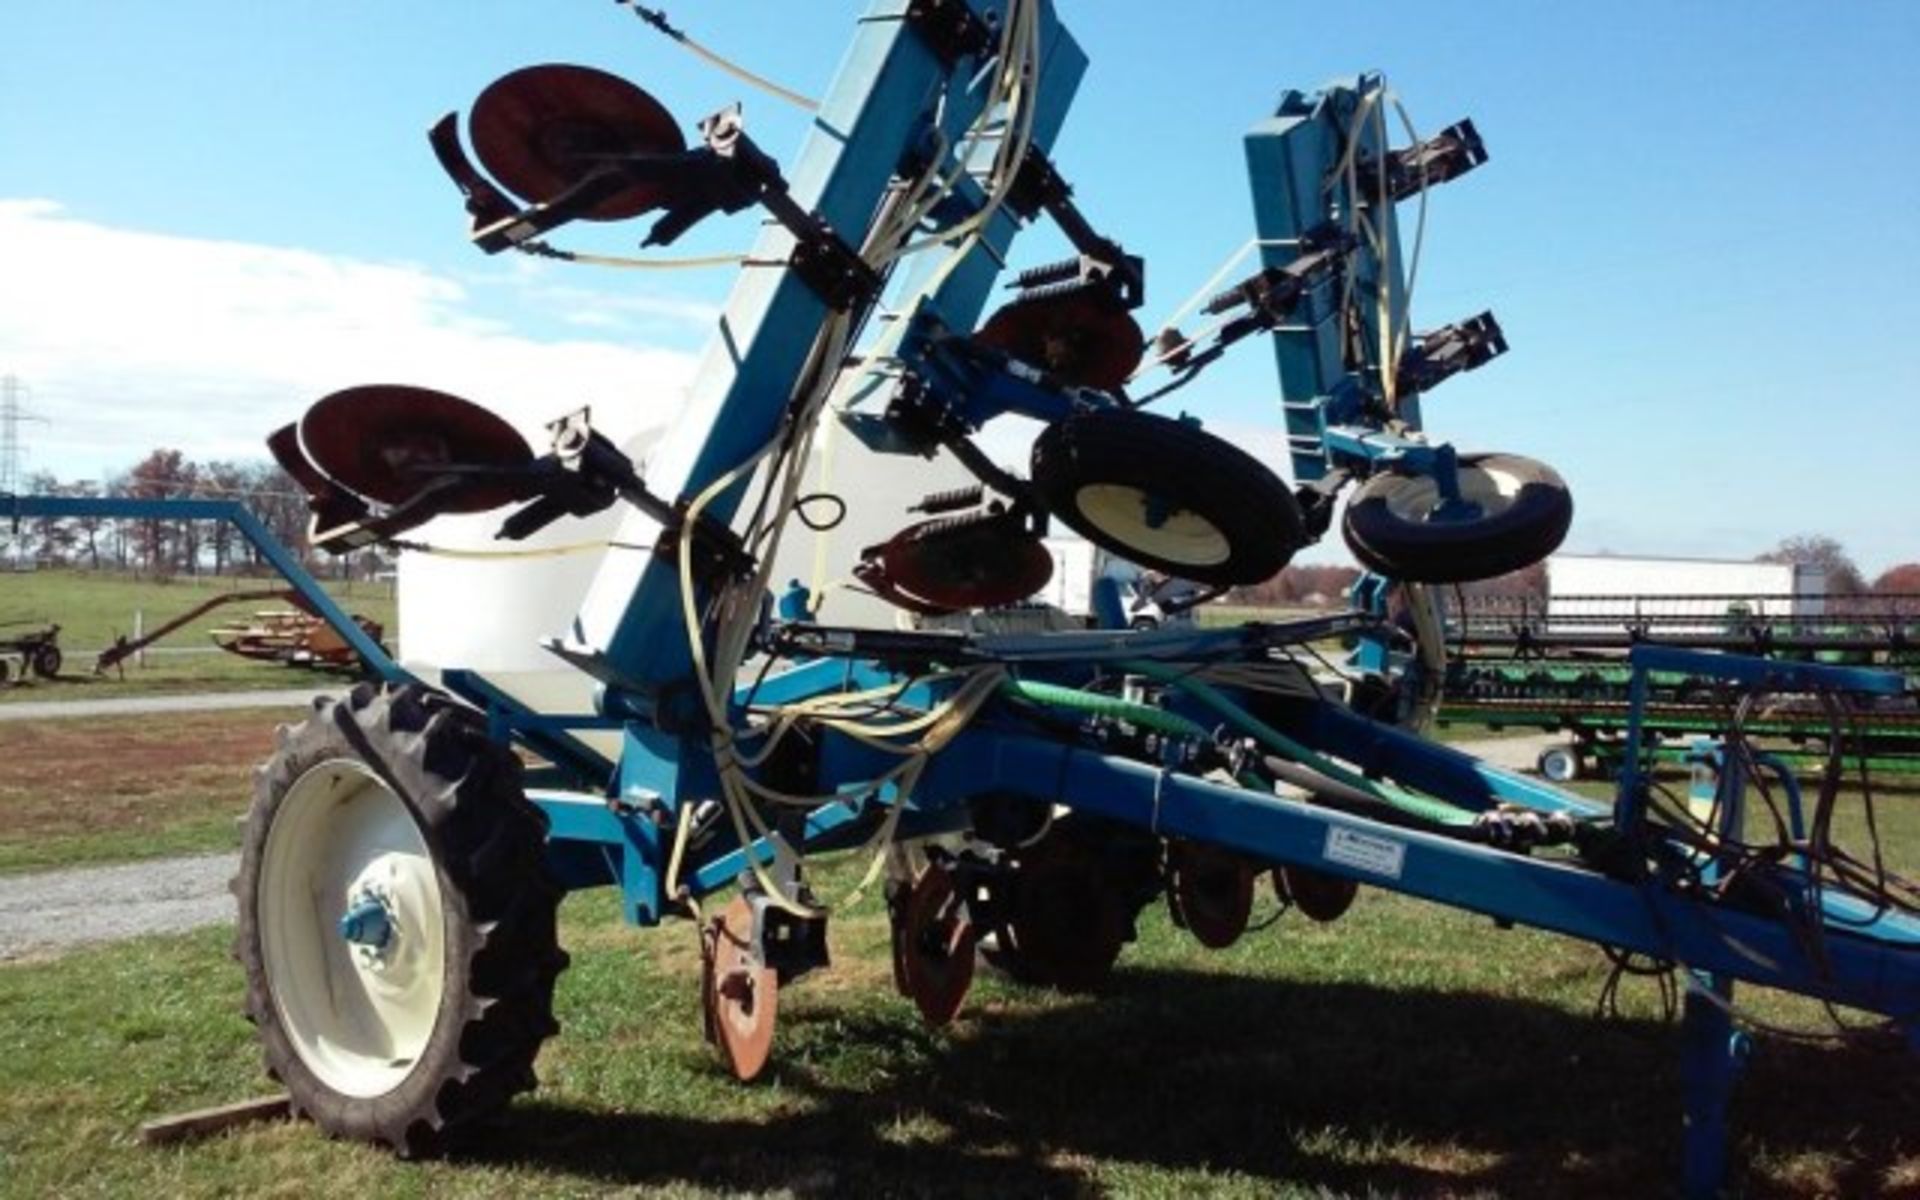 Lot 34 - Ag Systems Model 6400 Fertilizer Applicator 12', 15 Row, Like New Condition Model 6400 - Image 4 of 6